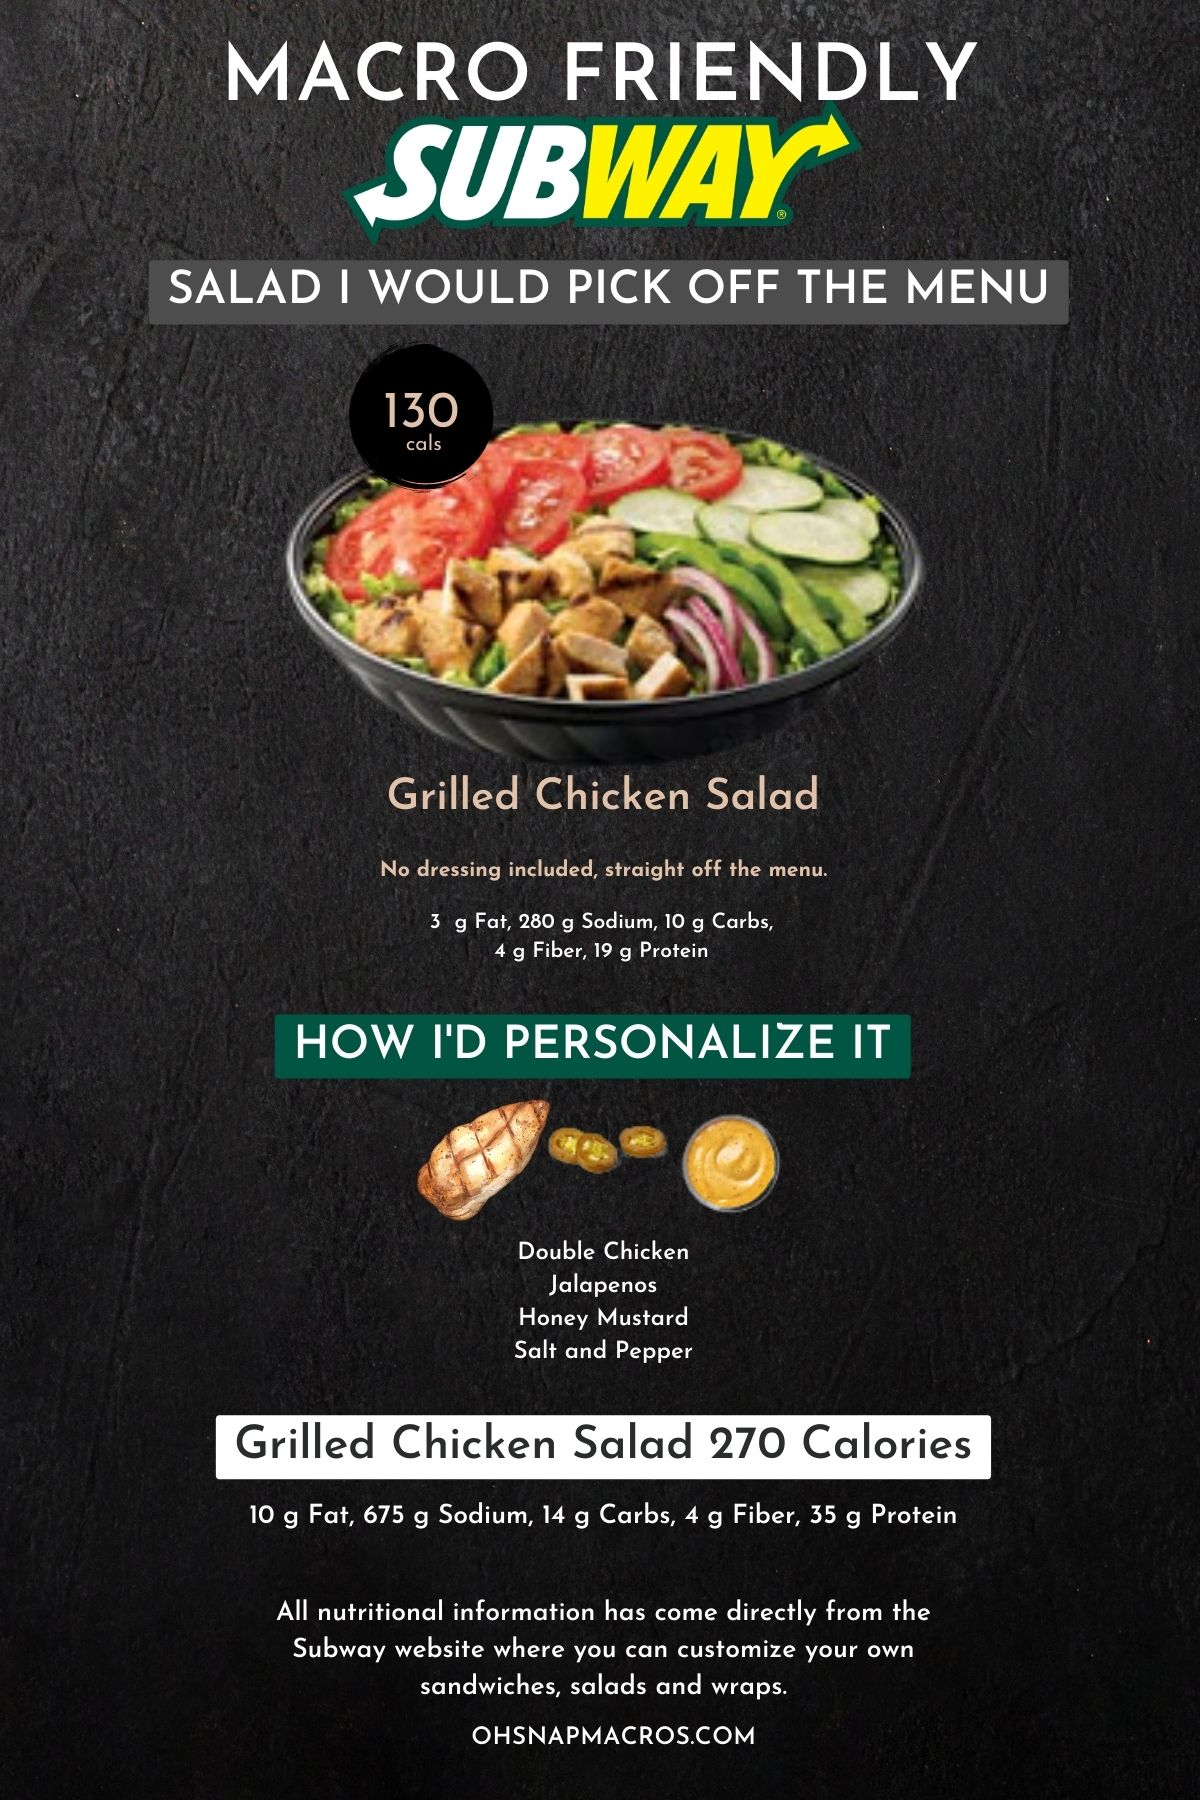 Graphic recommending a grilled chicken salad personalized with double chicken, jalapenos, honey mustard, salt, and pepper for 270 calories.